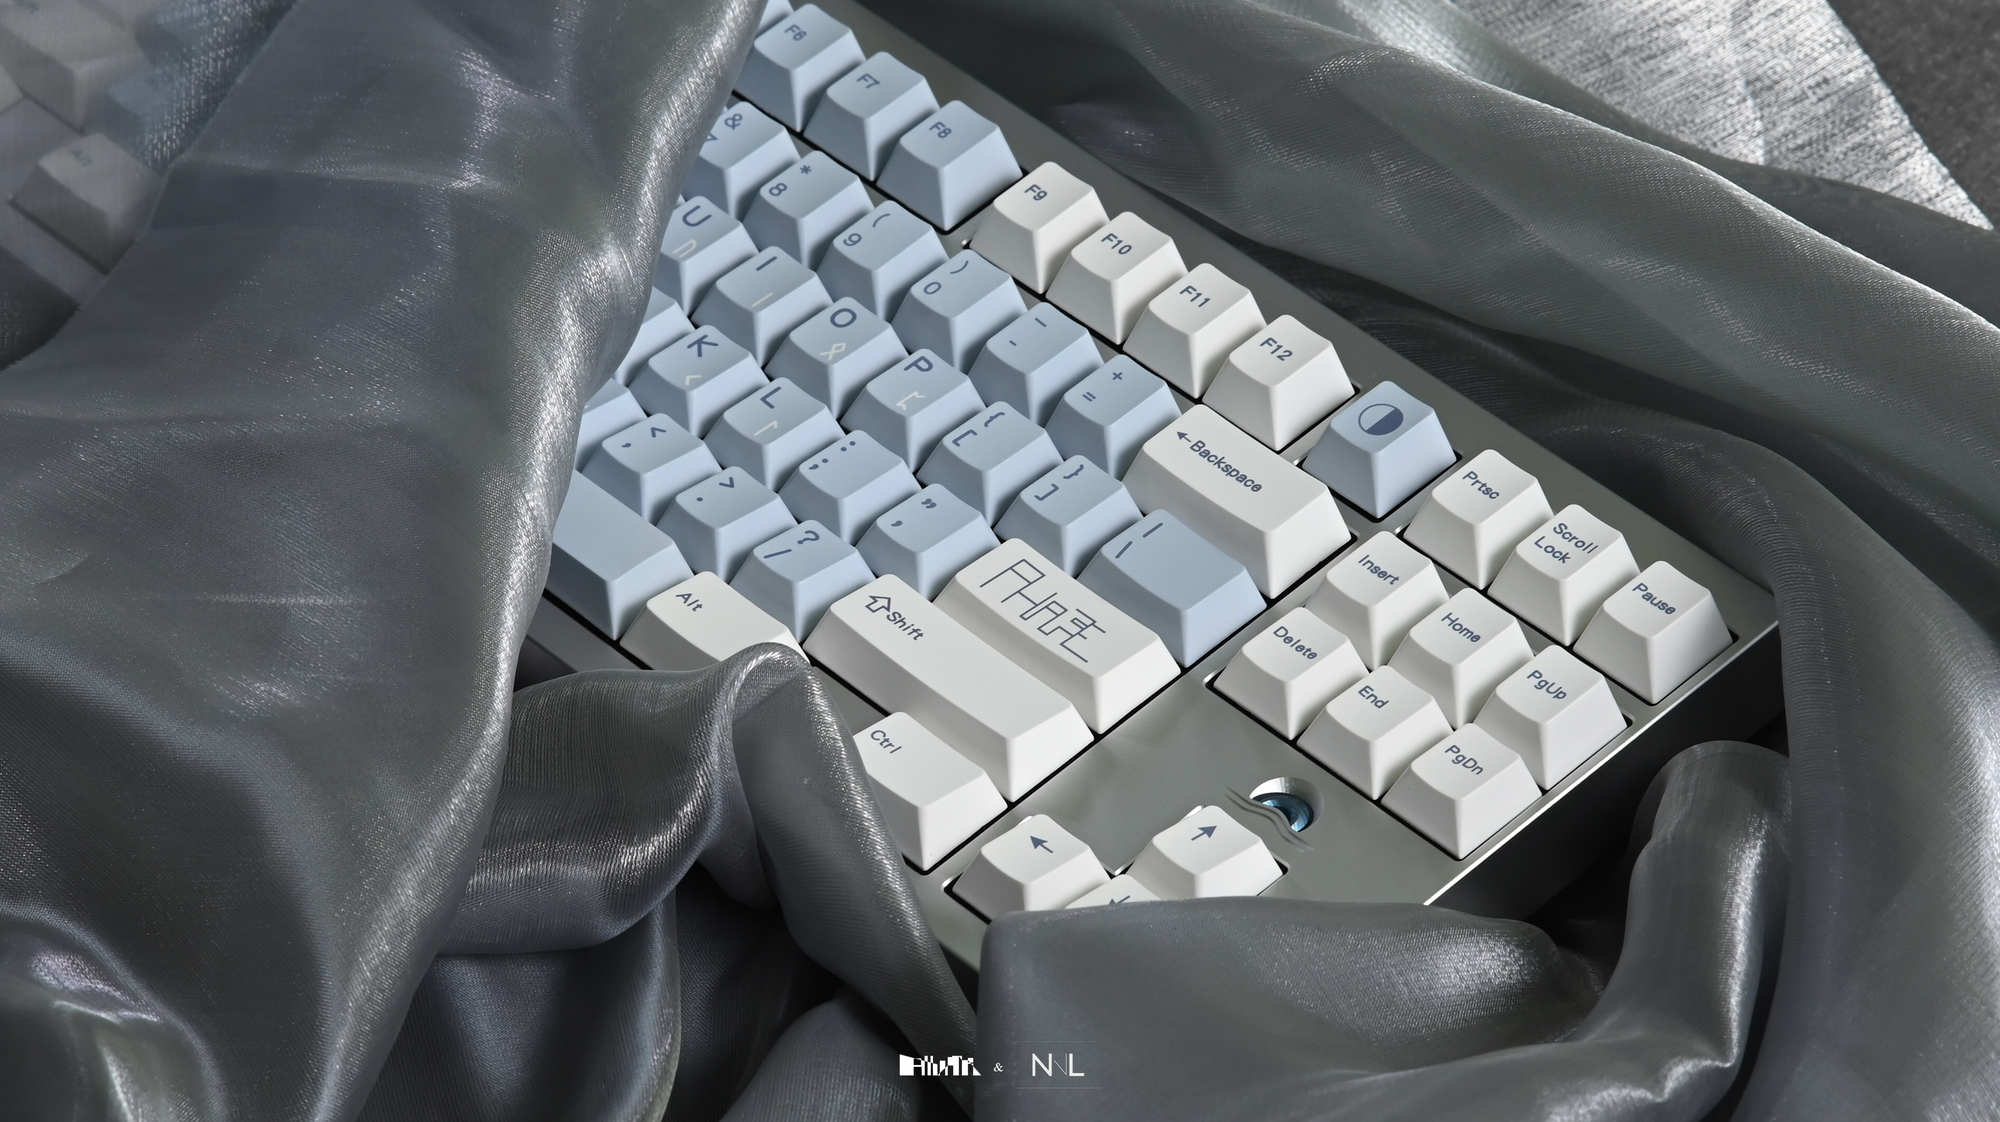 (Coming Soon)Moon Phase Keycaps